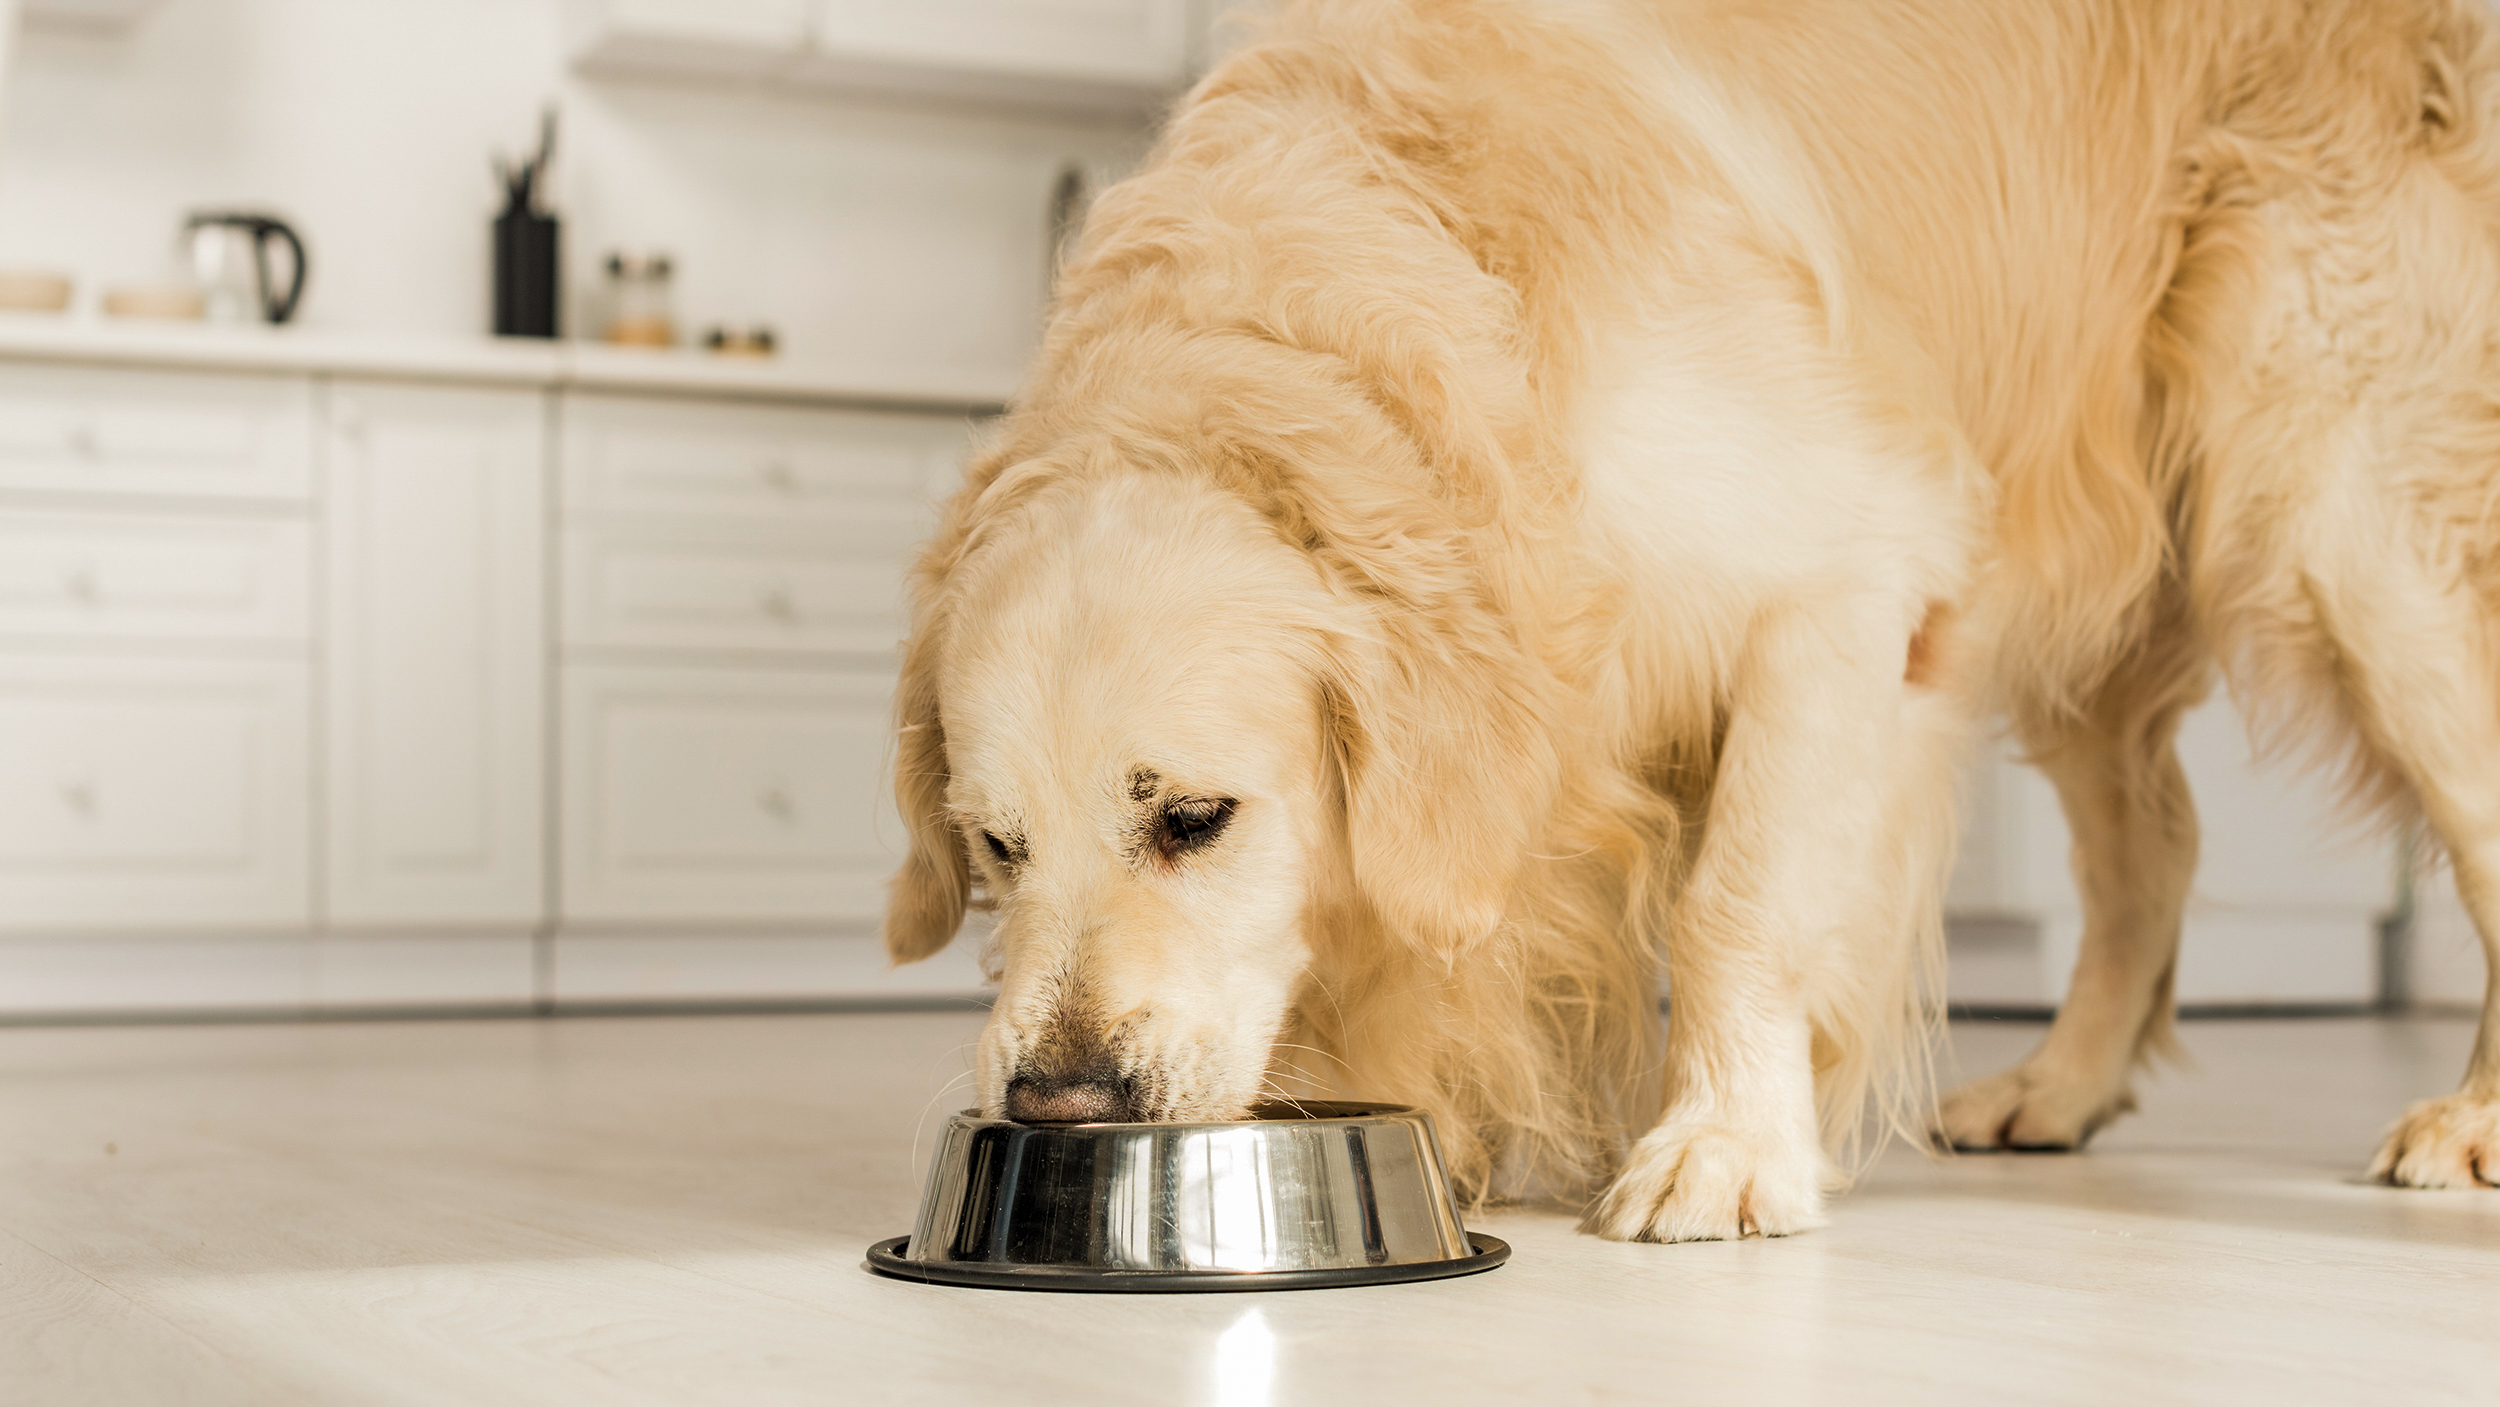 Golden Retriever adult standing in a kitchen eating from a silver bowl.